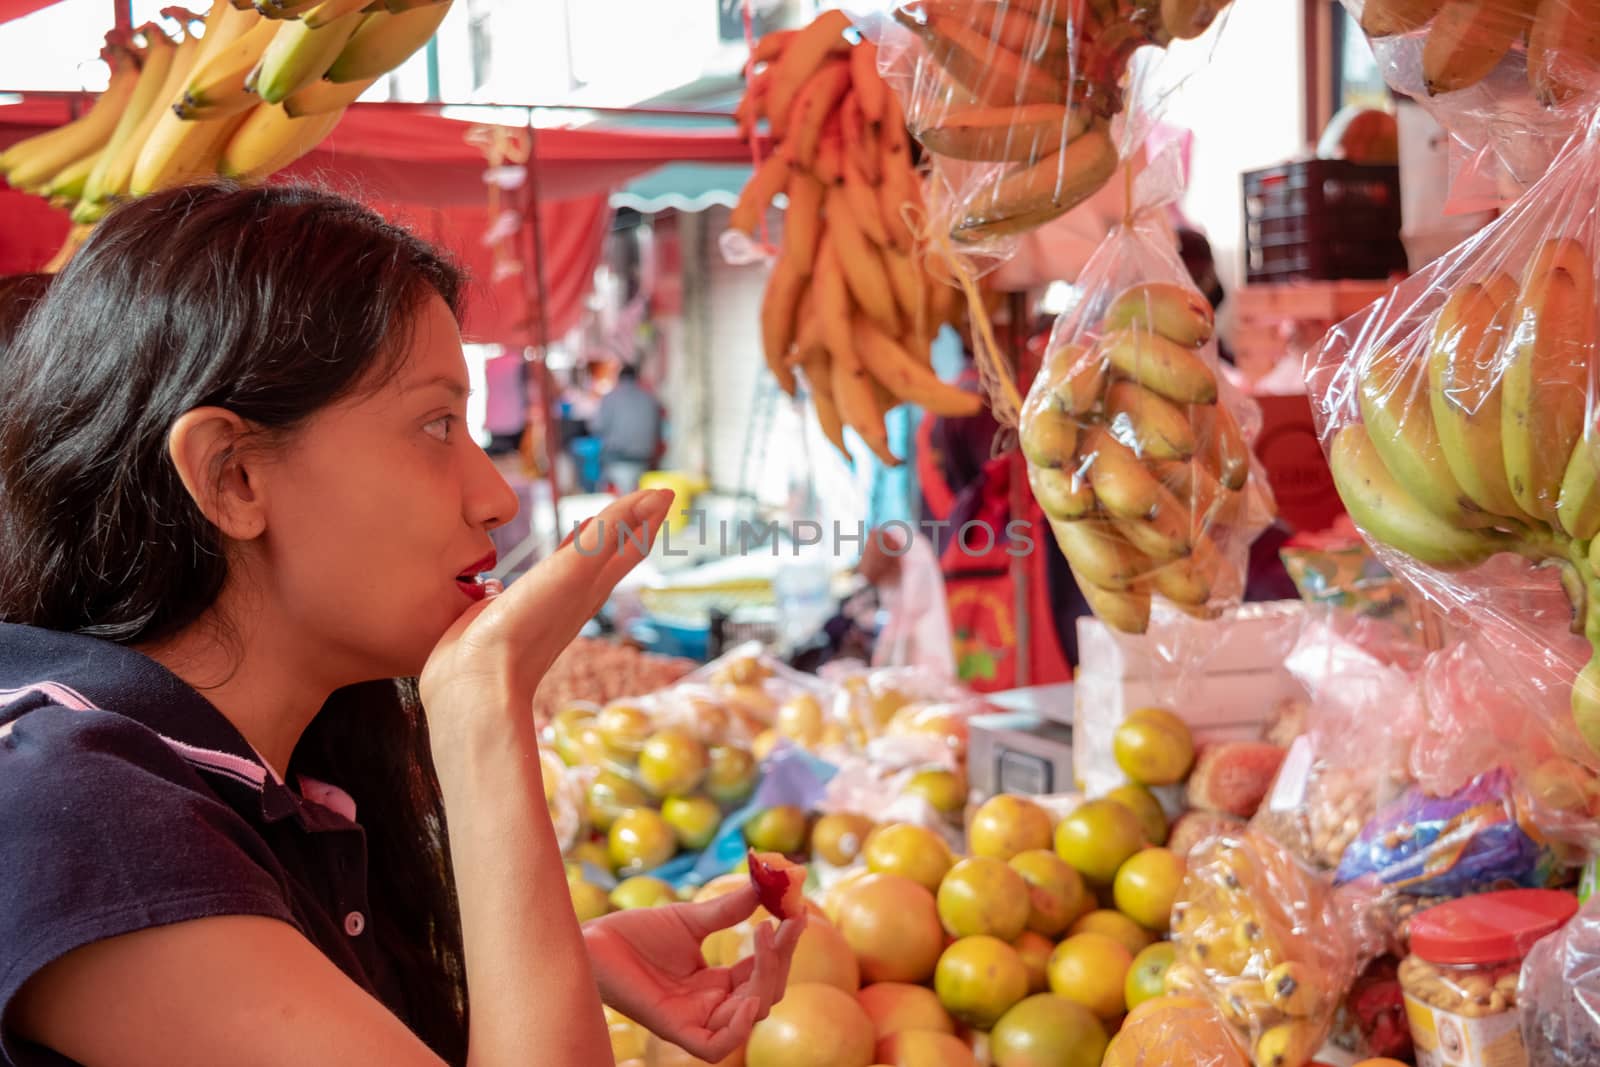 Woman buying some vegetables and fruits in a local mexican market